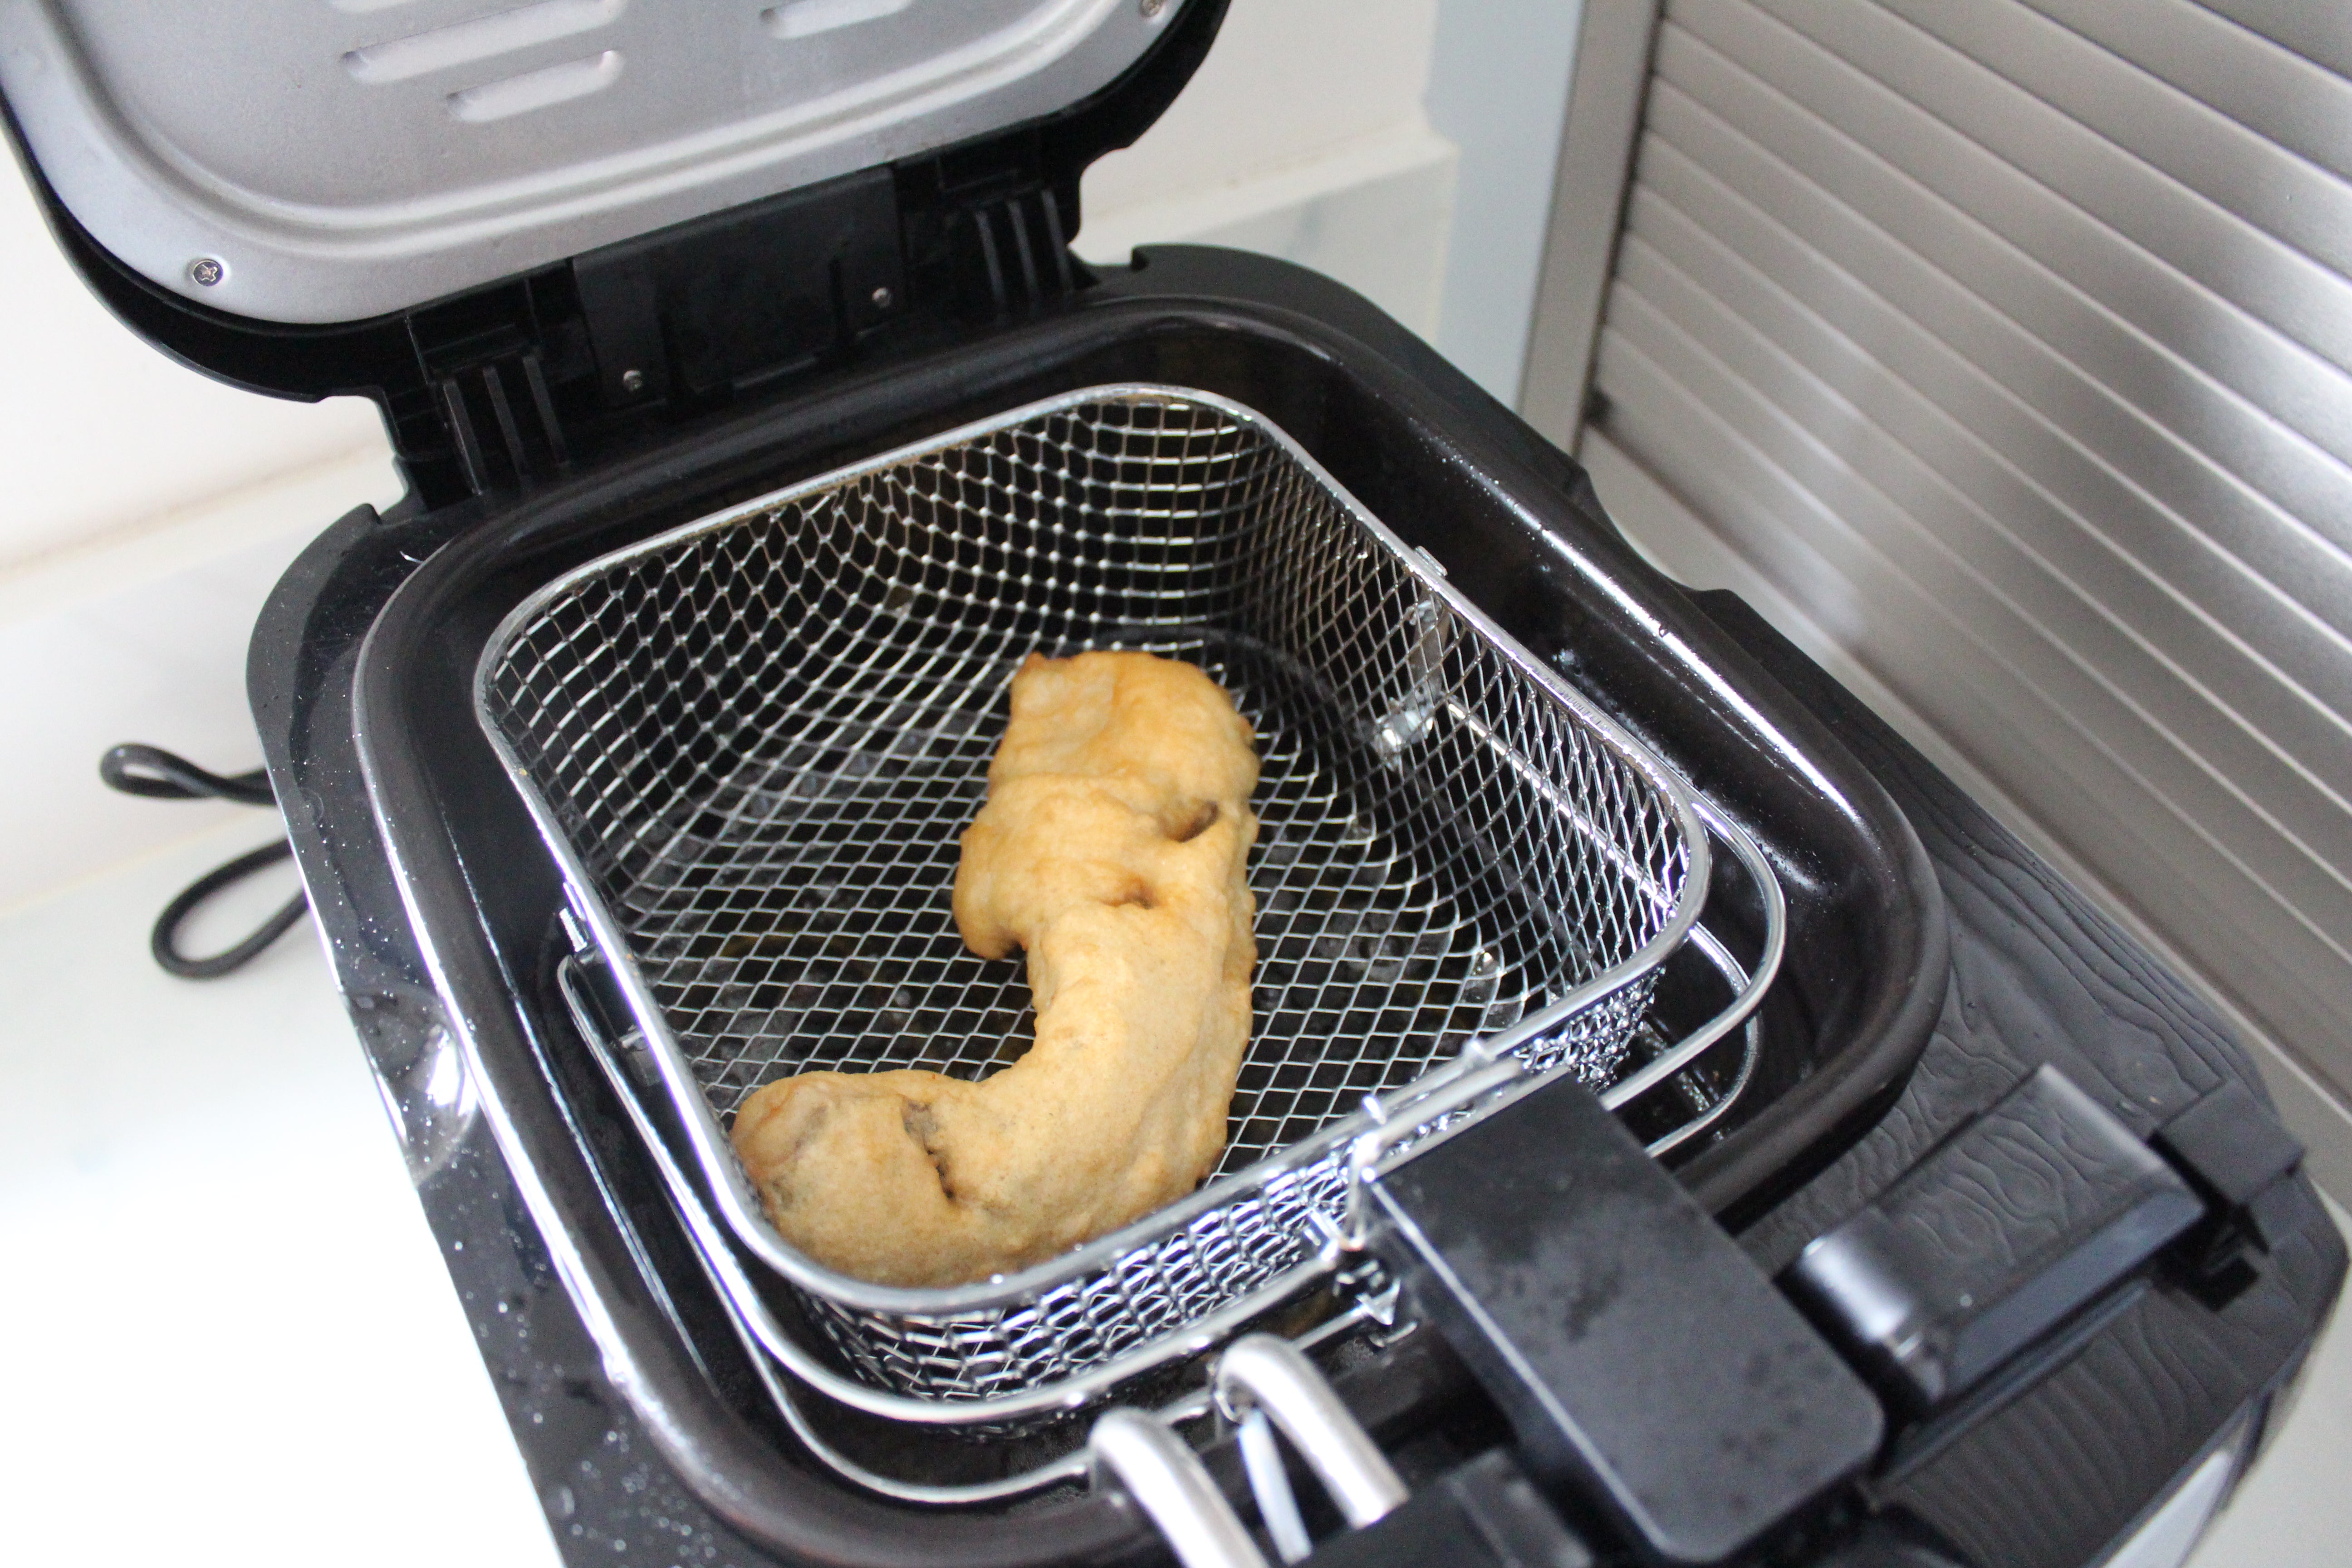 Russell Hobbs Digital Deep Fryer 24580 fishA black Rusell Hobbs Digital deep fryer kept on a kitchen platform with a fried bite kept inside itA black Rusell Hobbs Digital deep fryer kept on a kitchen platform with brown round quick bites being fried inside